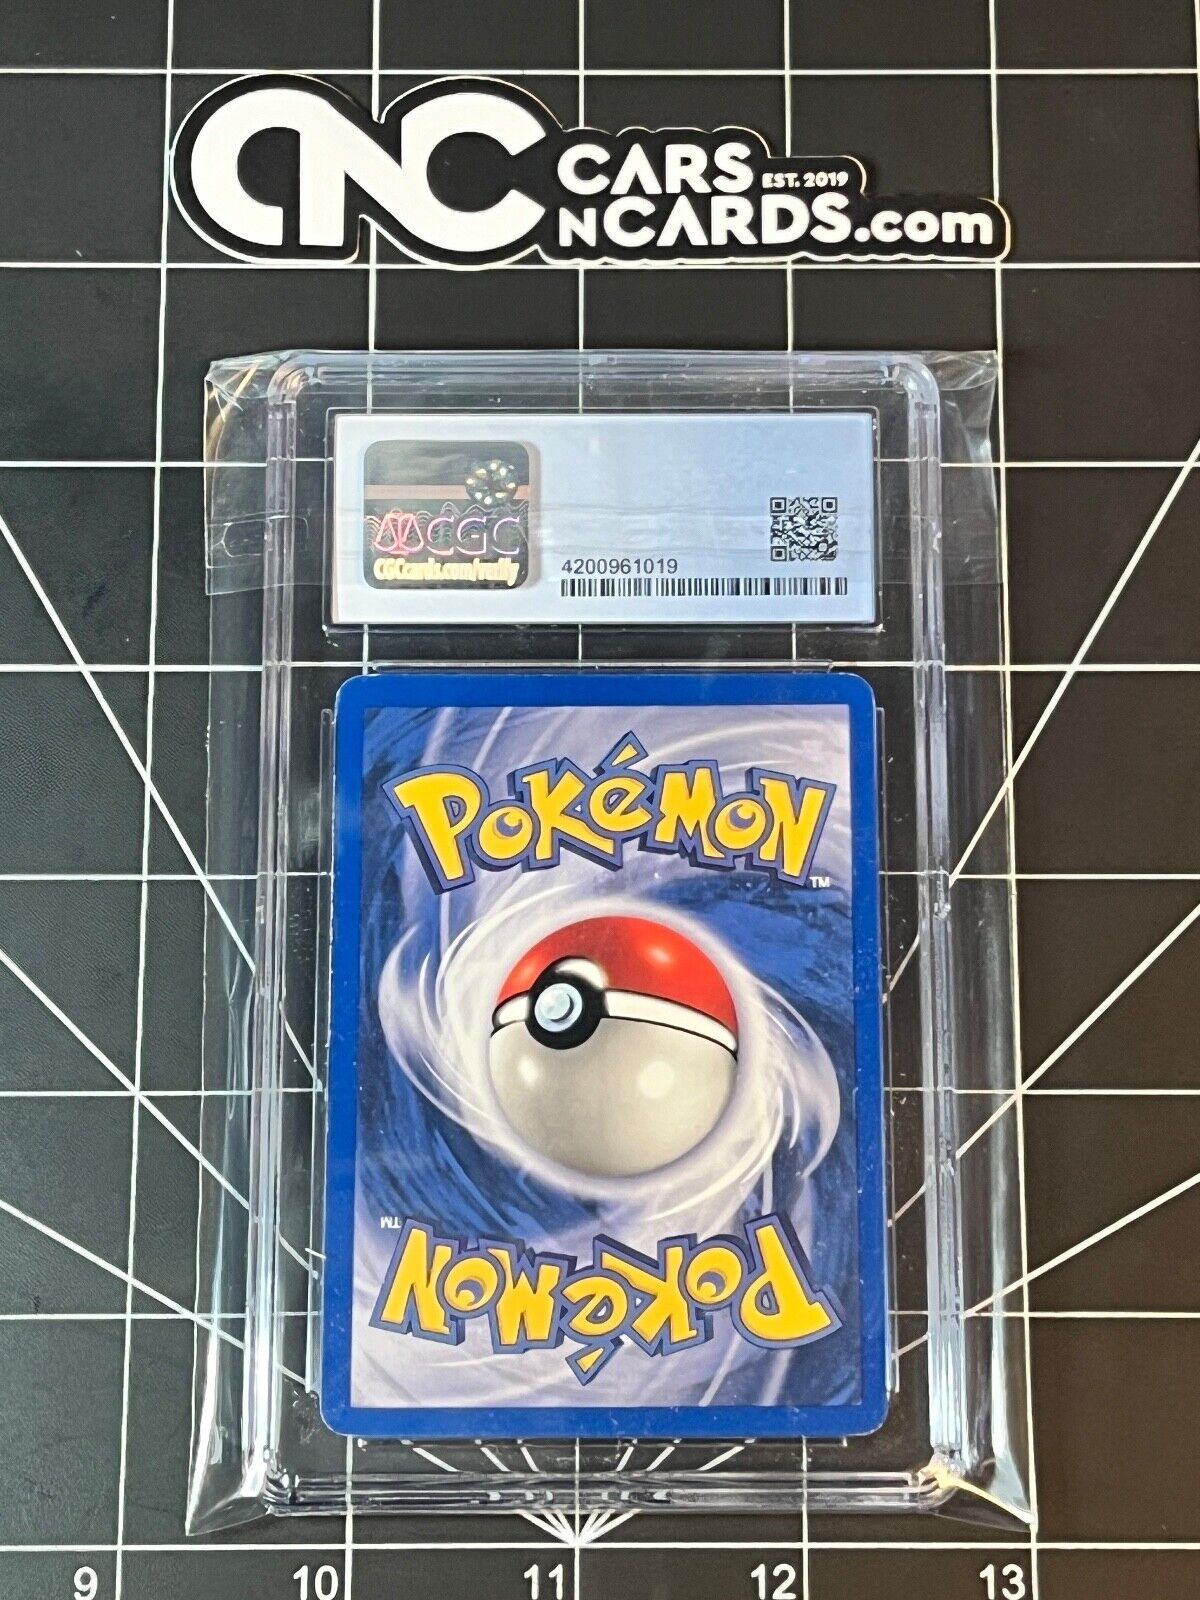 Pokémon (1999) Fossil Unlimited 3/62 Ditto Holo CGC 7 Near Mint